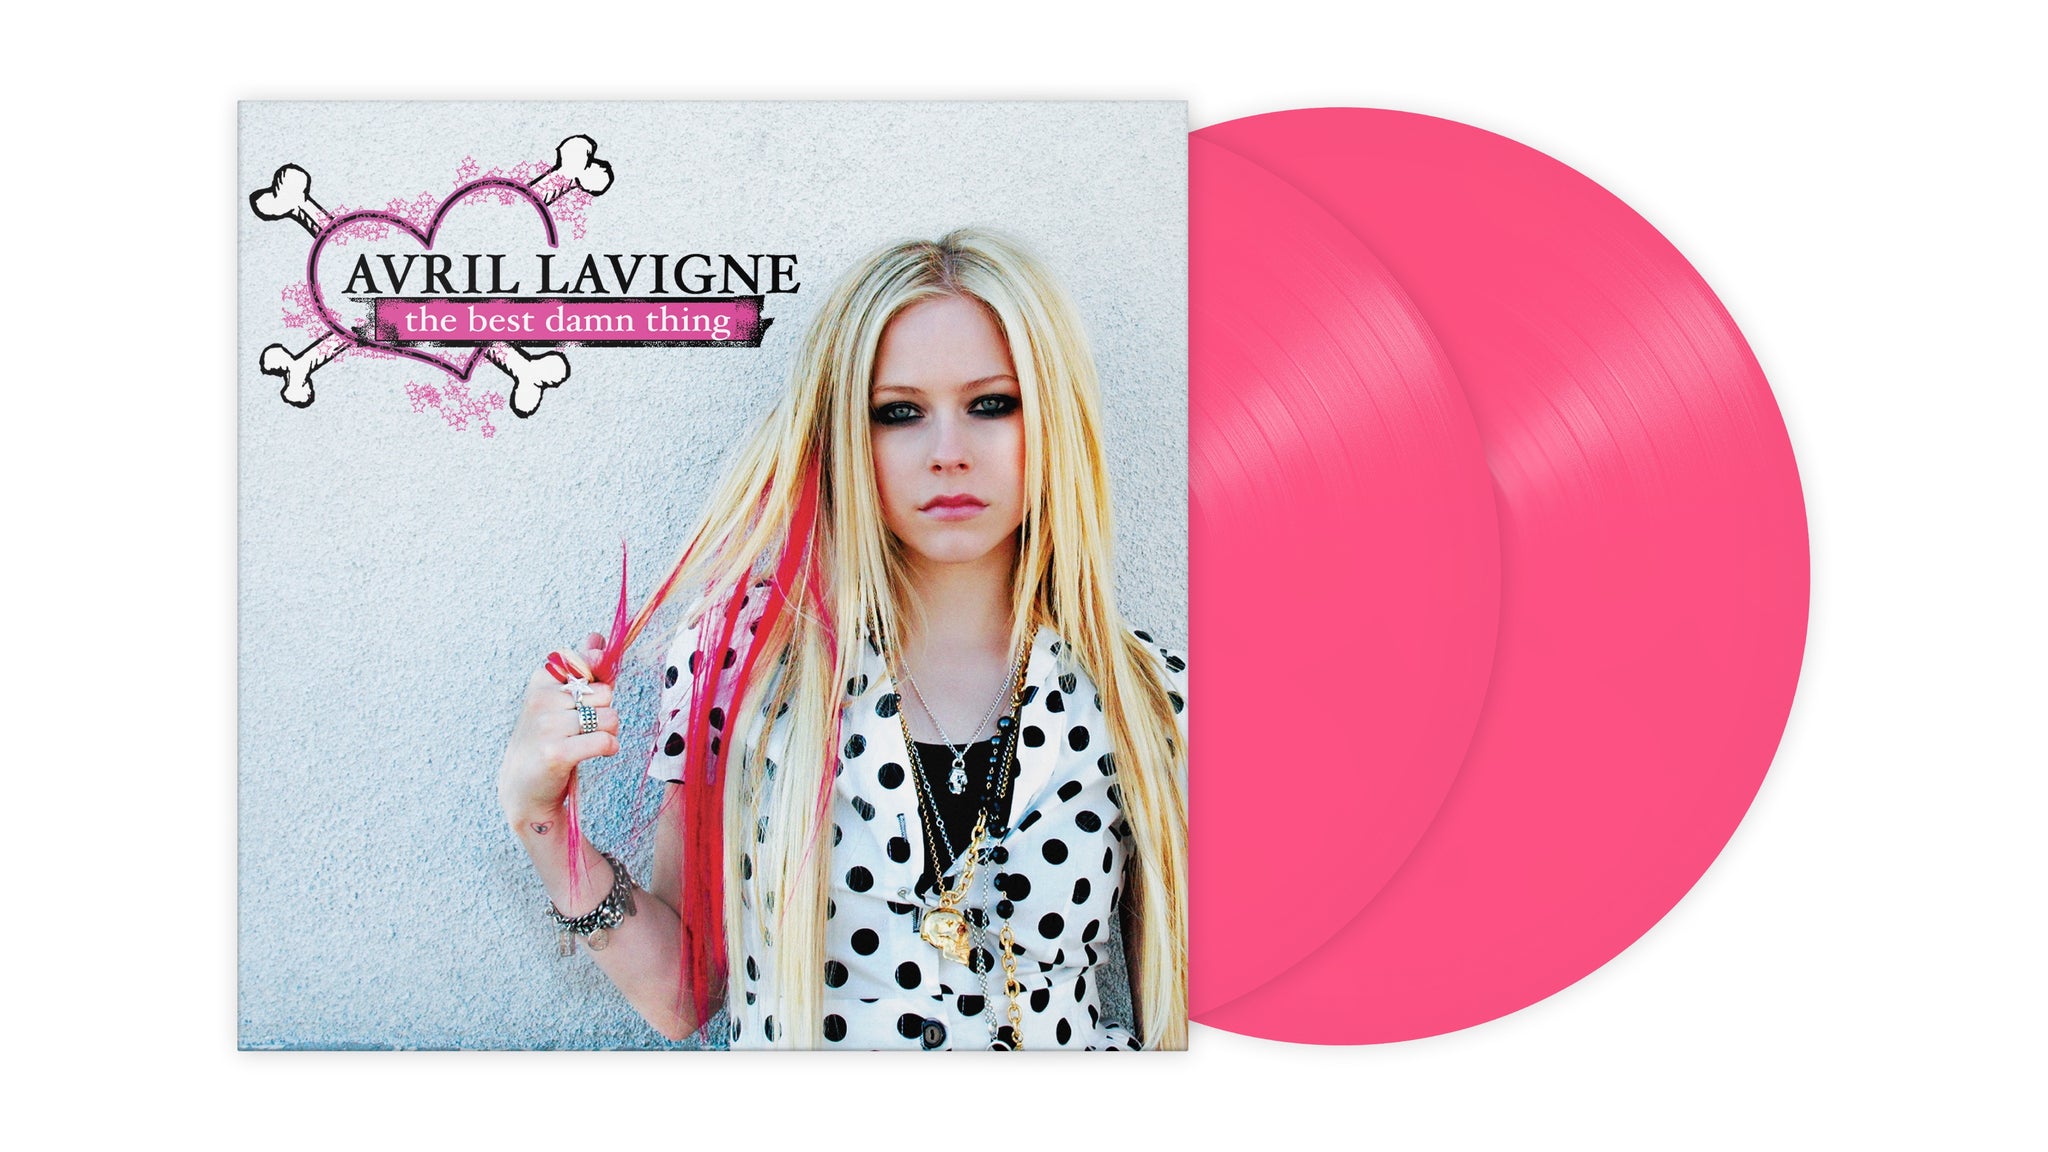 Avril Lavigne "The Best Damn Thing" 2x12" Bright Pink Vinyl - PRE-ORDER